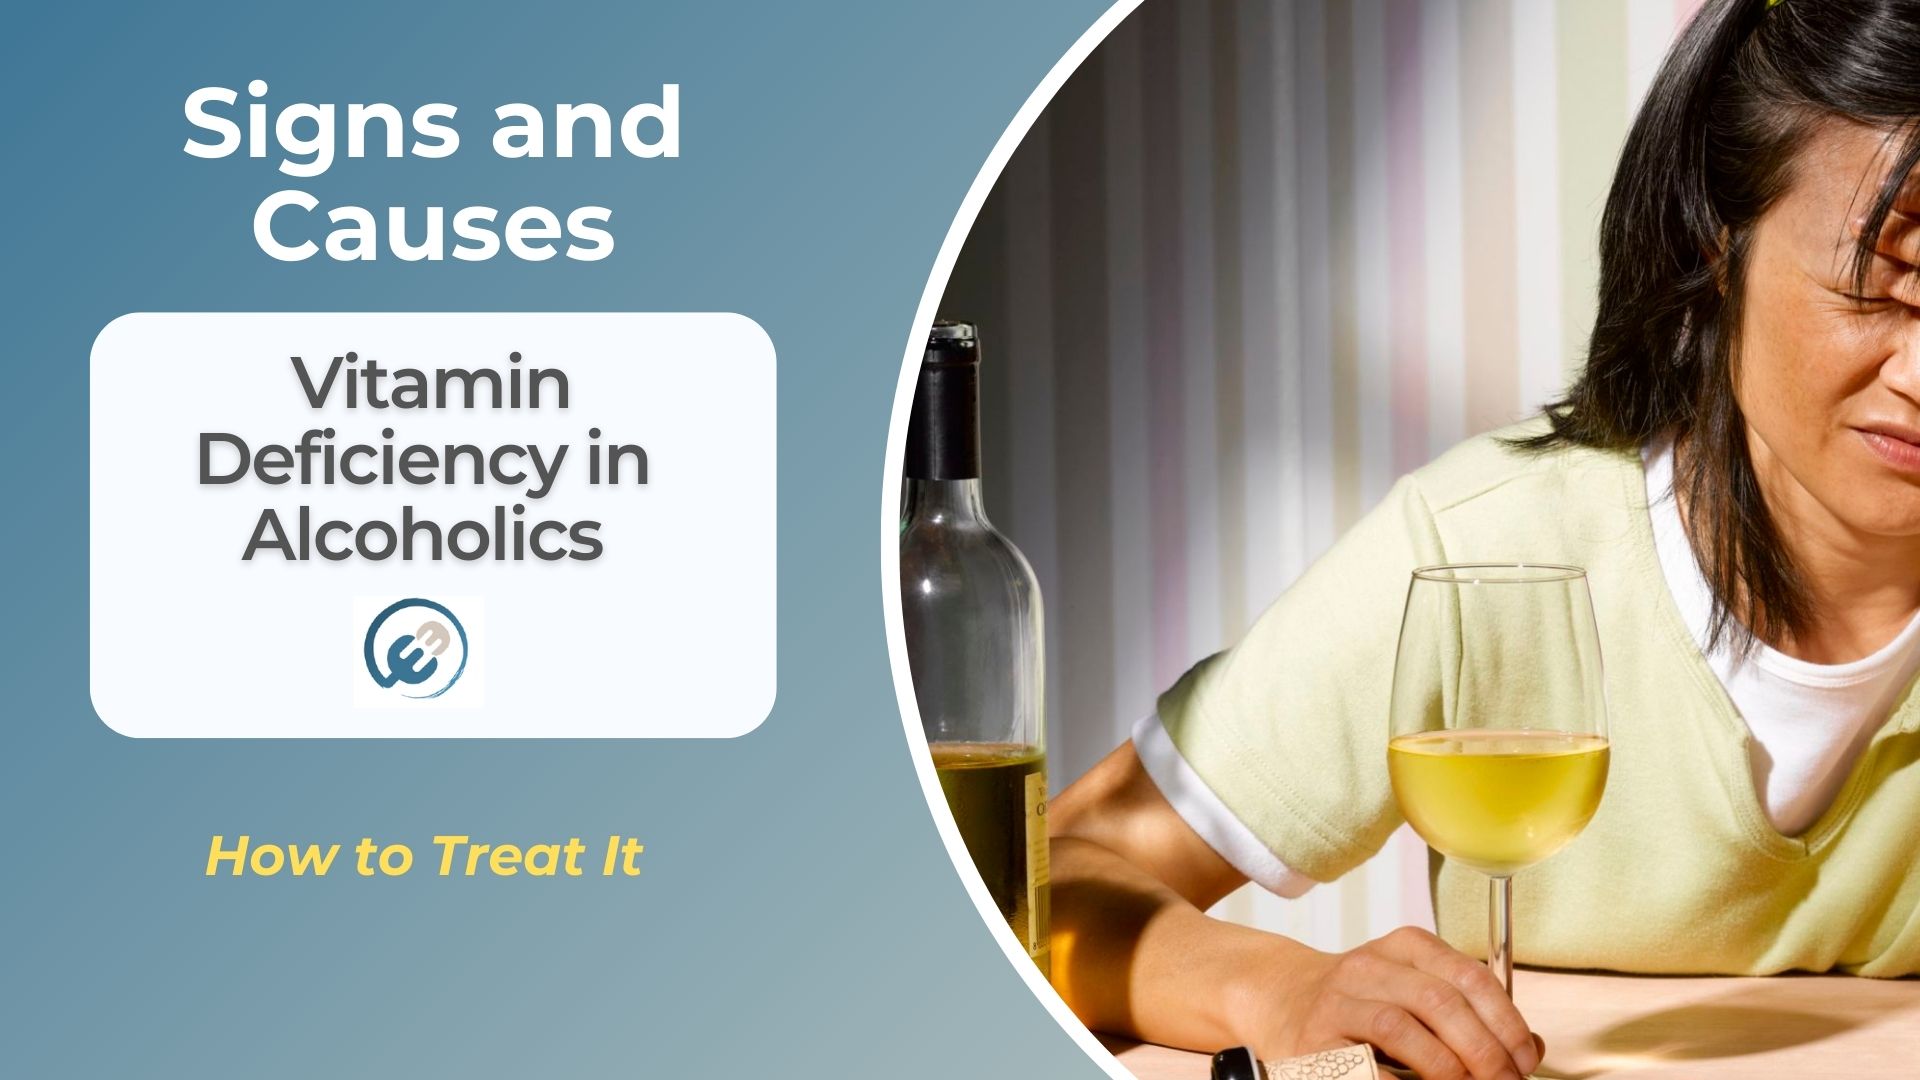 Signs and Causes of Vitamin Deficiency in Alcoholics How to Treat It